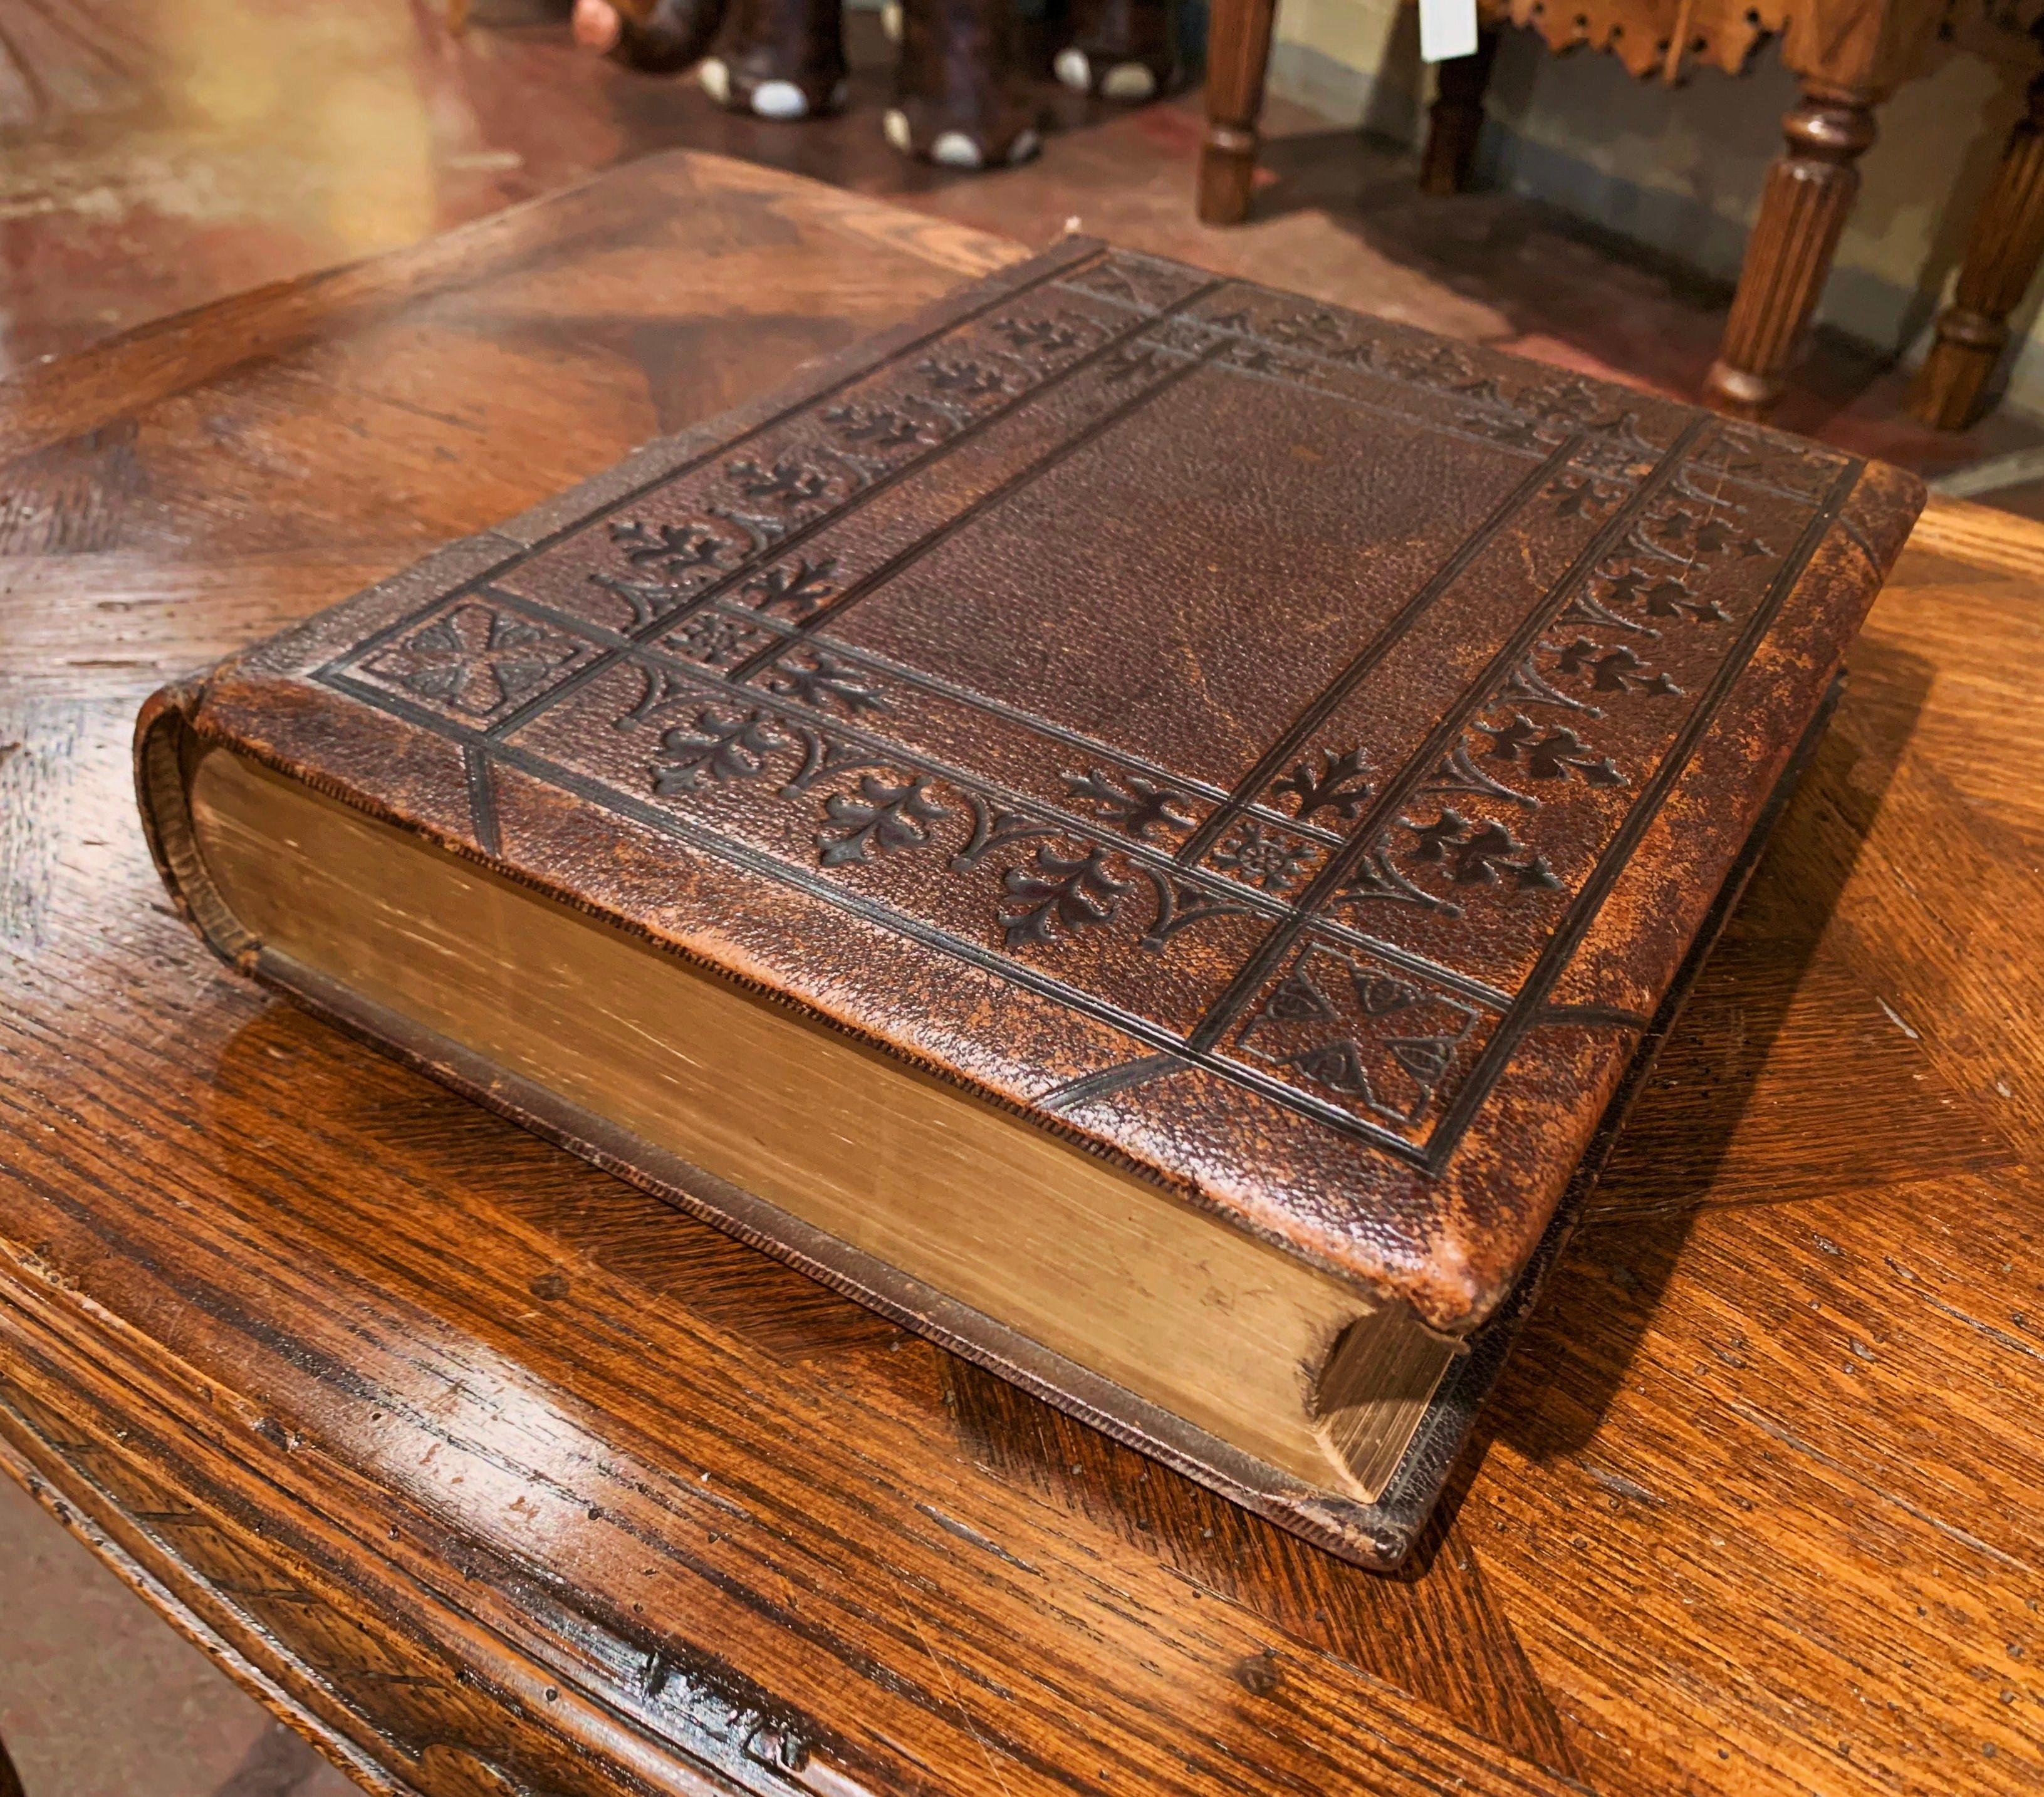 old leather bible